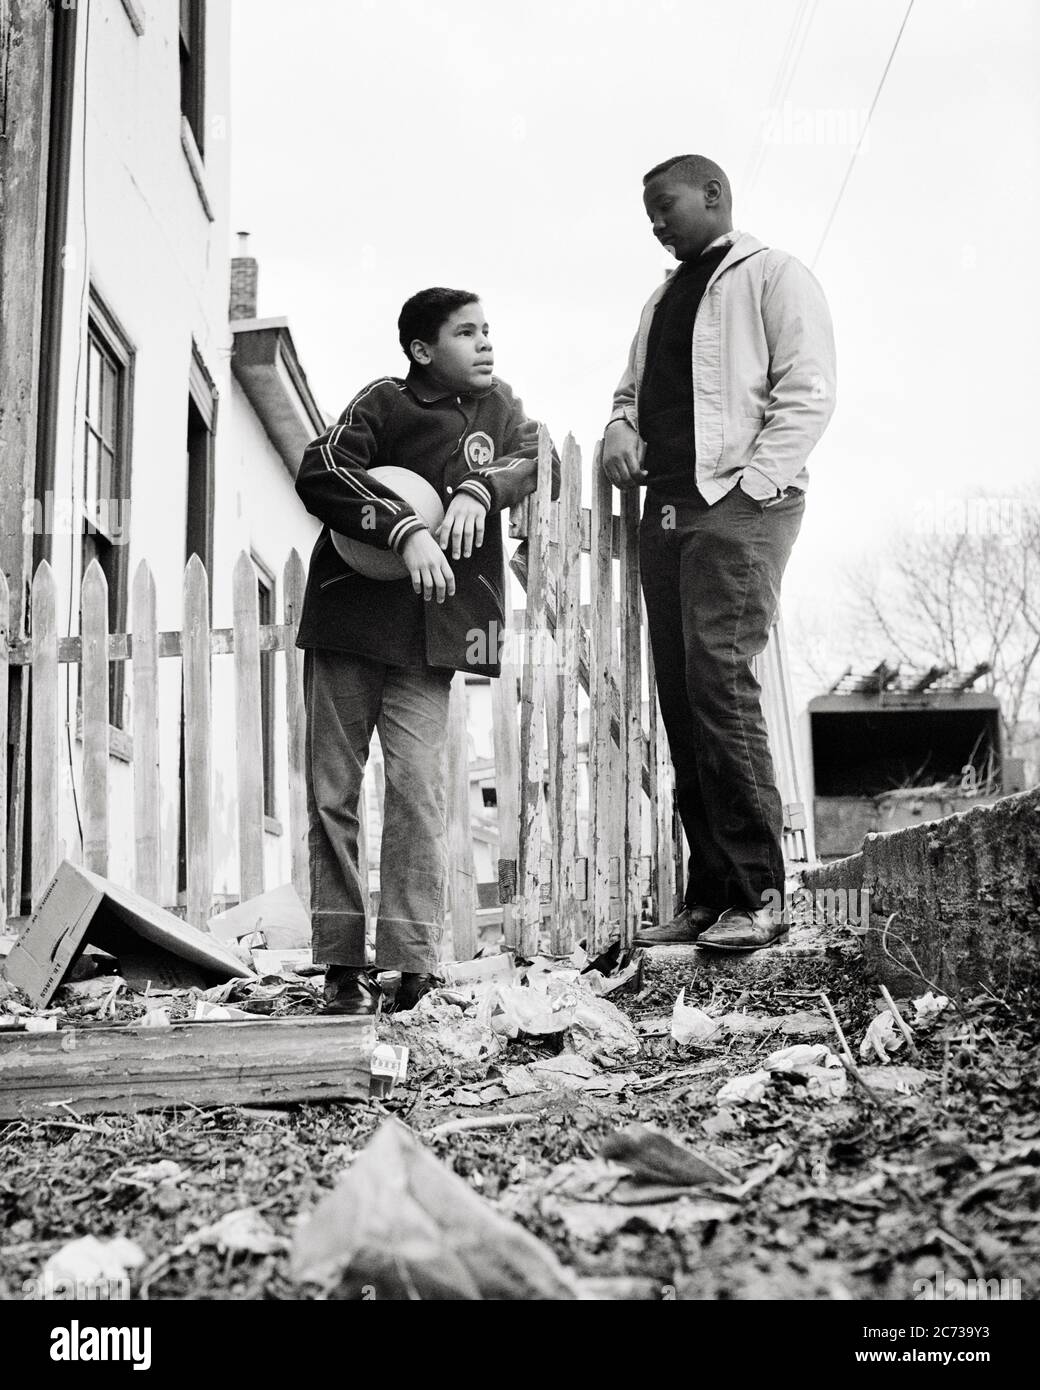 1960s TWO AFRICAN AMERICAN TEENAGE BOYS HOLDING BASKETBALL IN POVERTY STRICKEN URBAN NEIGHBORHOOD PHILADELPHIA PA USA  - n1962 HAR001 HARS JUVENILE ANGER FEAR BALANCE SAFETY COMPETITION LIFESTYLE BROTHERS POOR HEALTHINESS HOME LIFE UNITED STATES COPY SPACE FRIENDSHIP FULL-LENGTH UNITED STATES OF AMERICA MALES RISK TEENAGE BOY SIBLINGS B&W SADNESS NORTH AMERICA FREEDOM NORTH AMERICAN TEMPTATION DREAMS WELLNESS NEIGHBORHOOD STRATEGY AFRICAN-AMERICANS COURAGE AFRICAN-AMERICAN LOW ANGLE PA POWERFUL BLACK ETHNICITY PRIDE IN OF ON OPPORTUNITY SIBLING CONCEPTUAL ESCAPE DISADVANTAGED DISAFFECTED Stock Photo